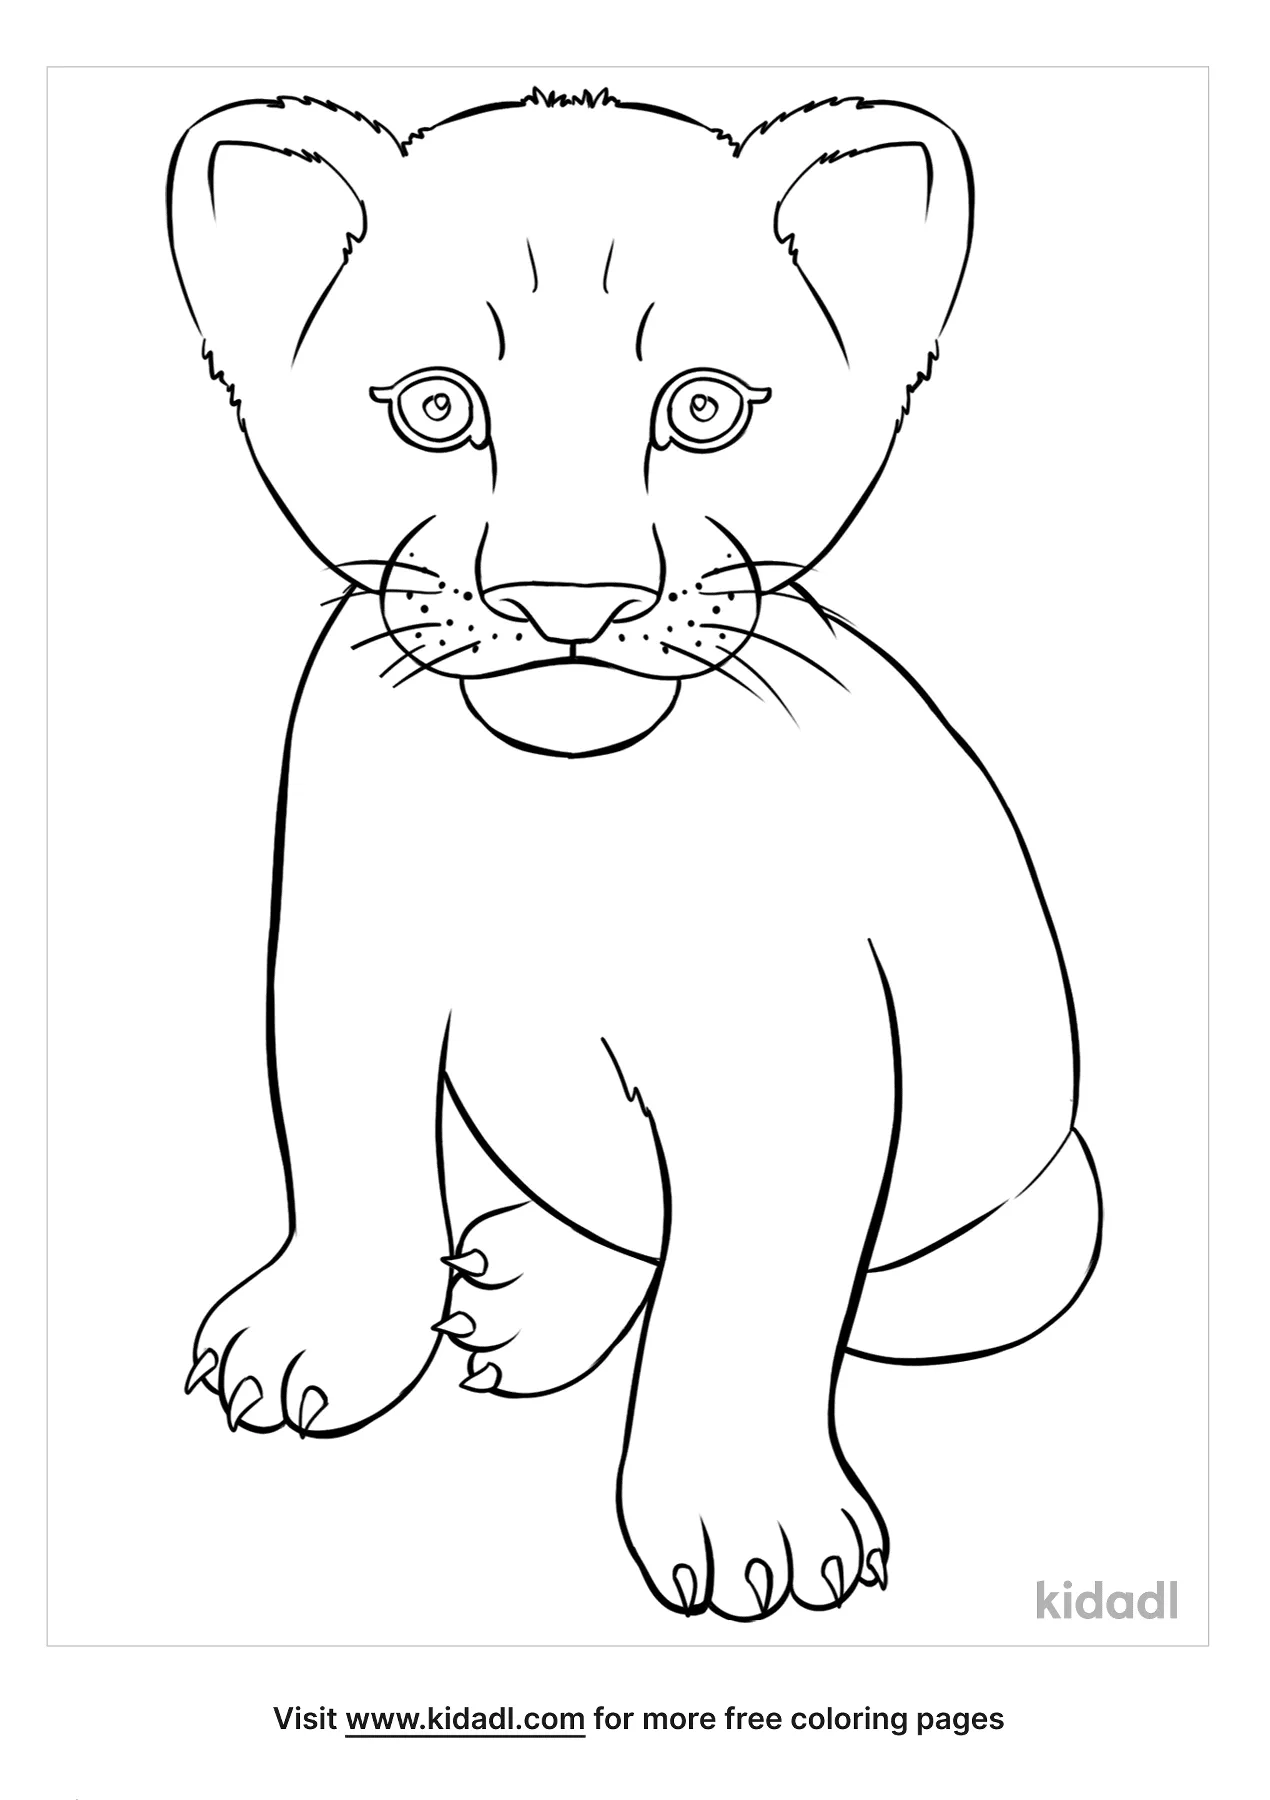 Baby Lion Coloring Pages   Free Animals Coloring Pages   Kidadl